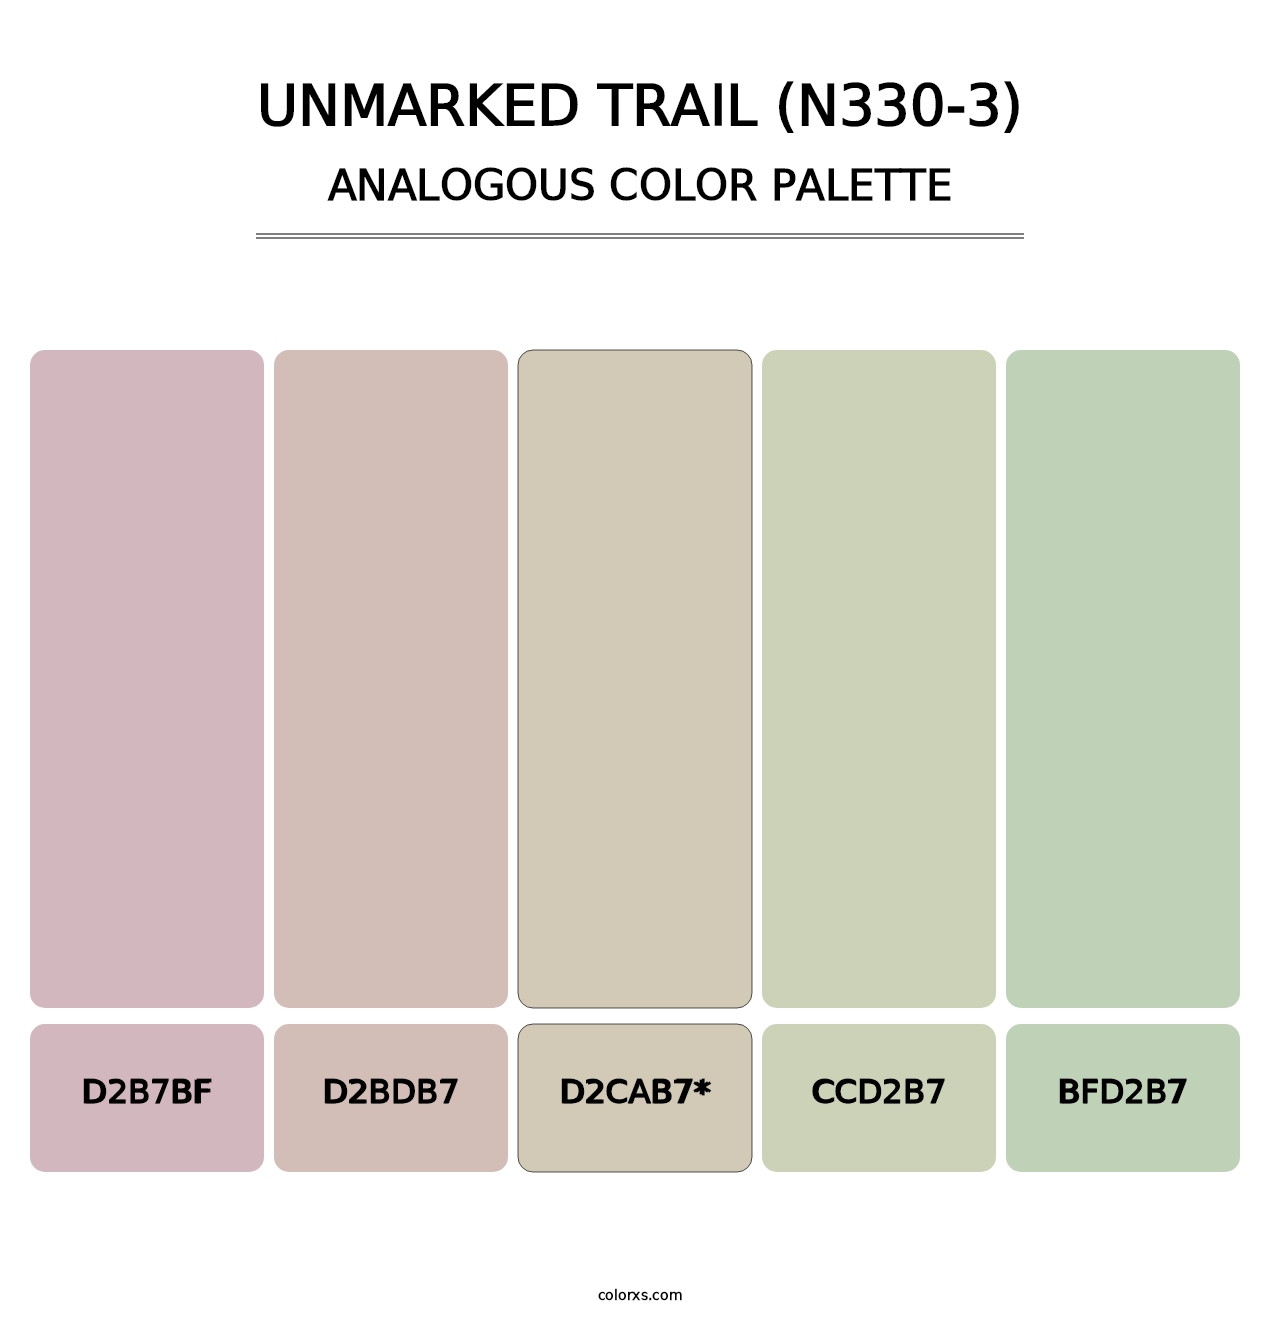 Unmarked Trail (N330-3) - Analogous Color Palette